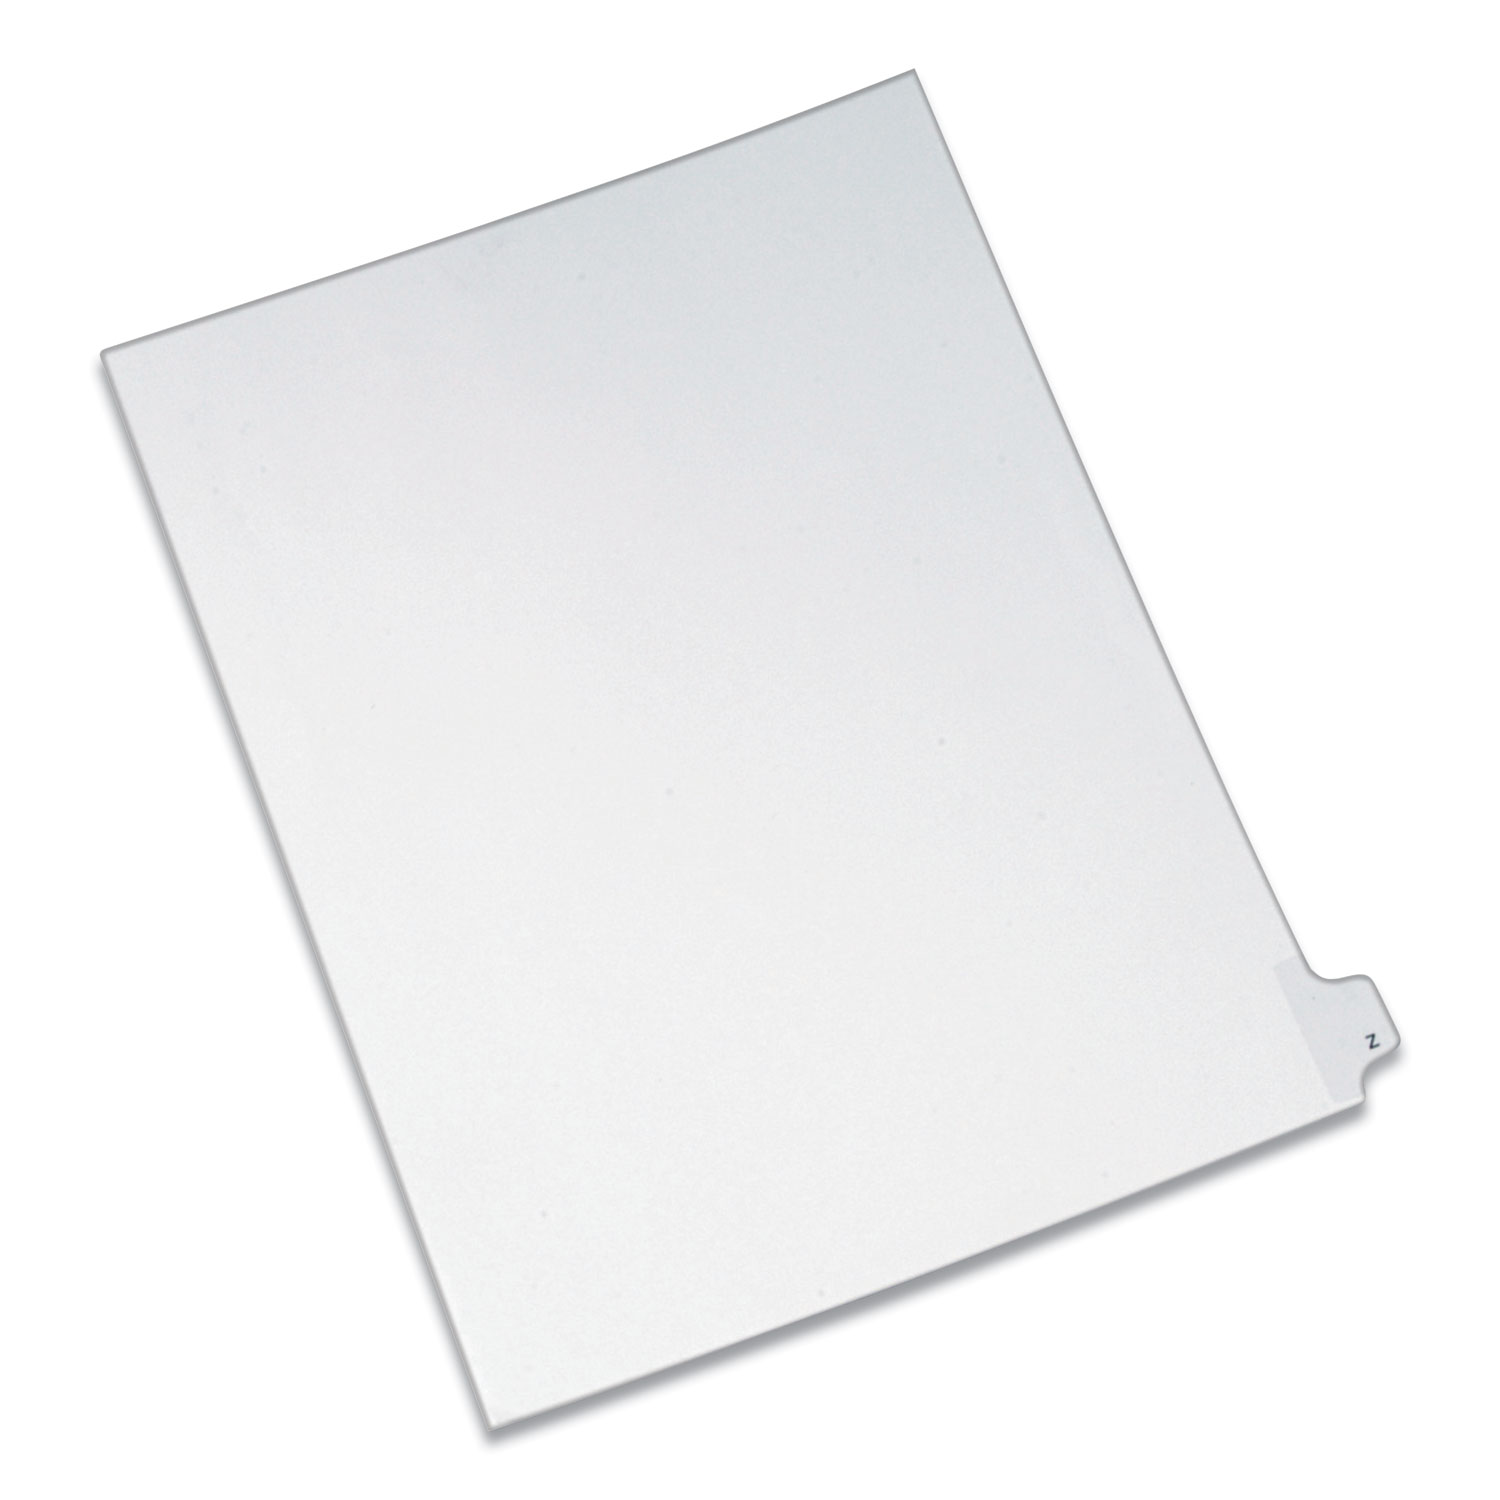 Avery Style 8.5 x 11 inches 5 Pack of 25 Side Tab 11915 White Avery Individual Legal Exhibit Dividers 